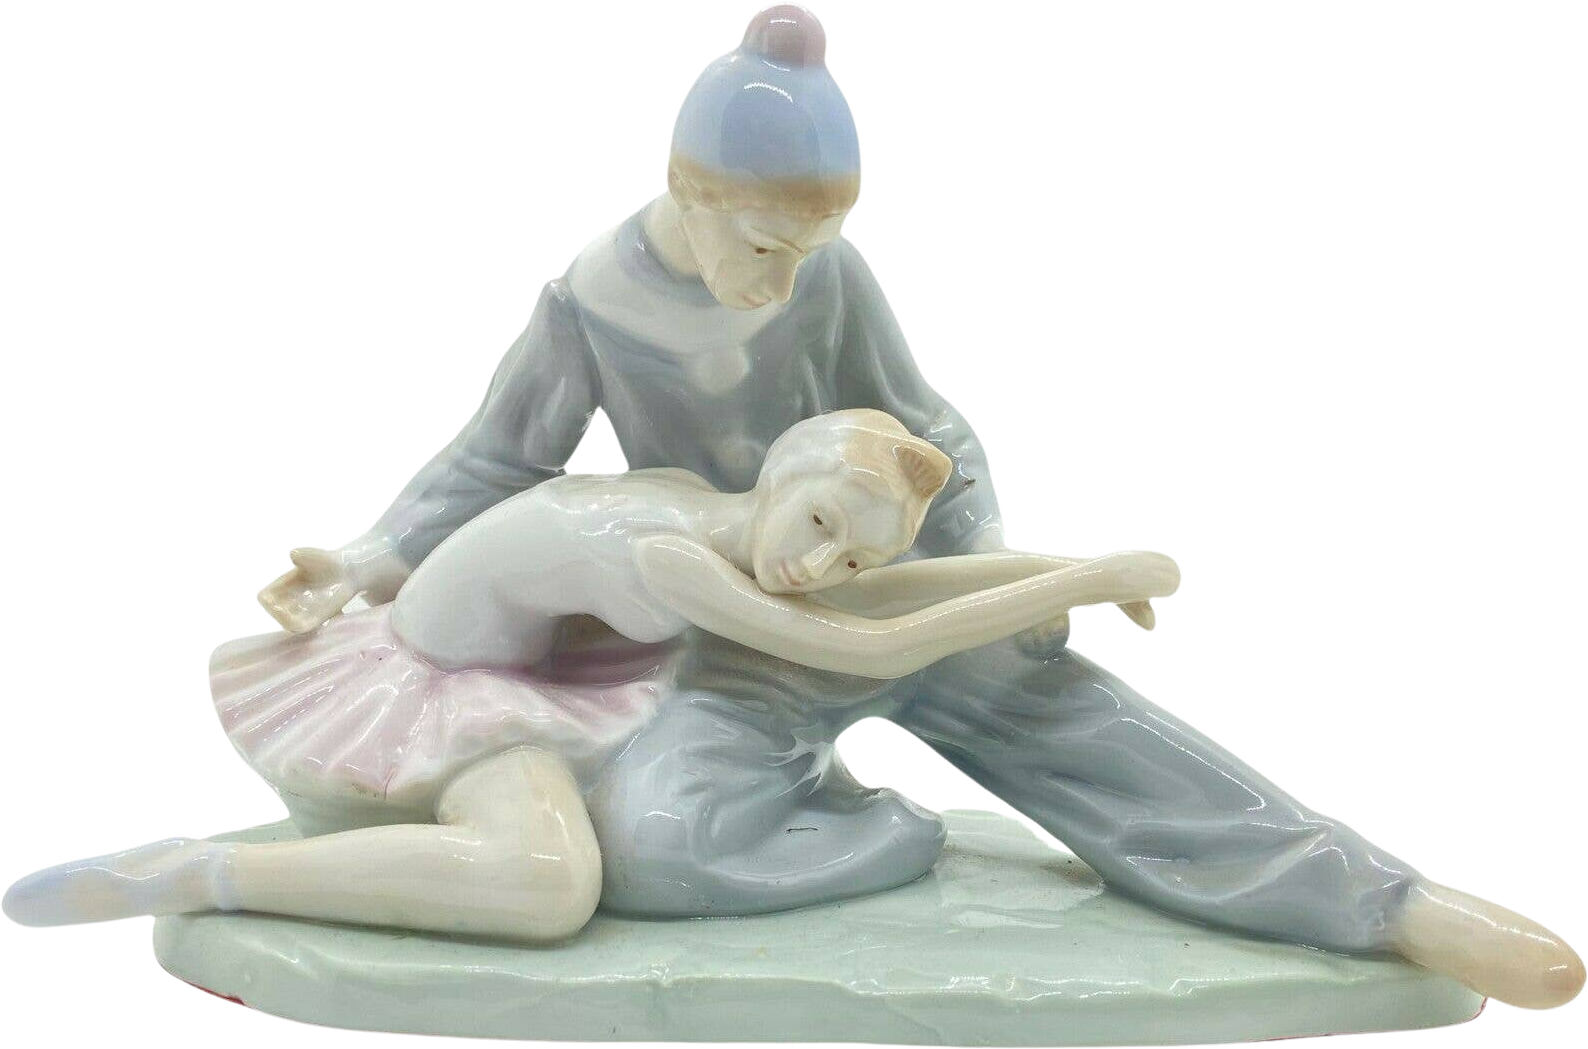 Vintage Meico Porcelain Harlequin Clown and Ballerina Closing